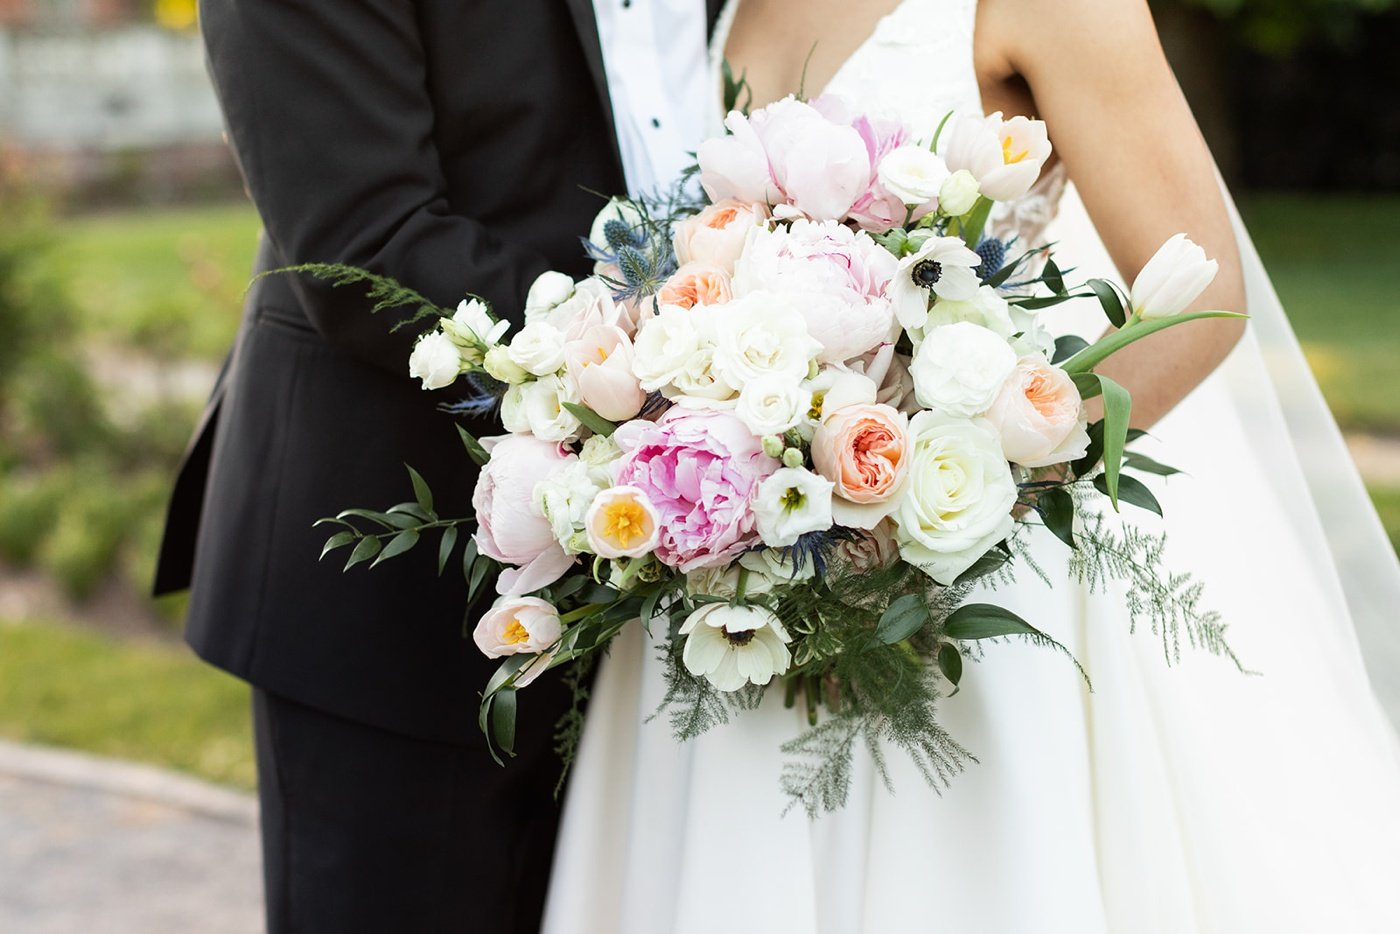 Bride holding a garden-inspired wedding bouquet filled with pink peonies, peach garden roses, and anemones by Sayles Livingston Design